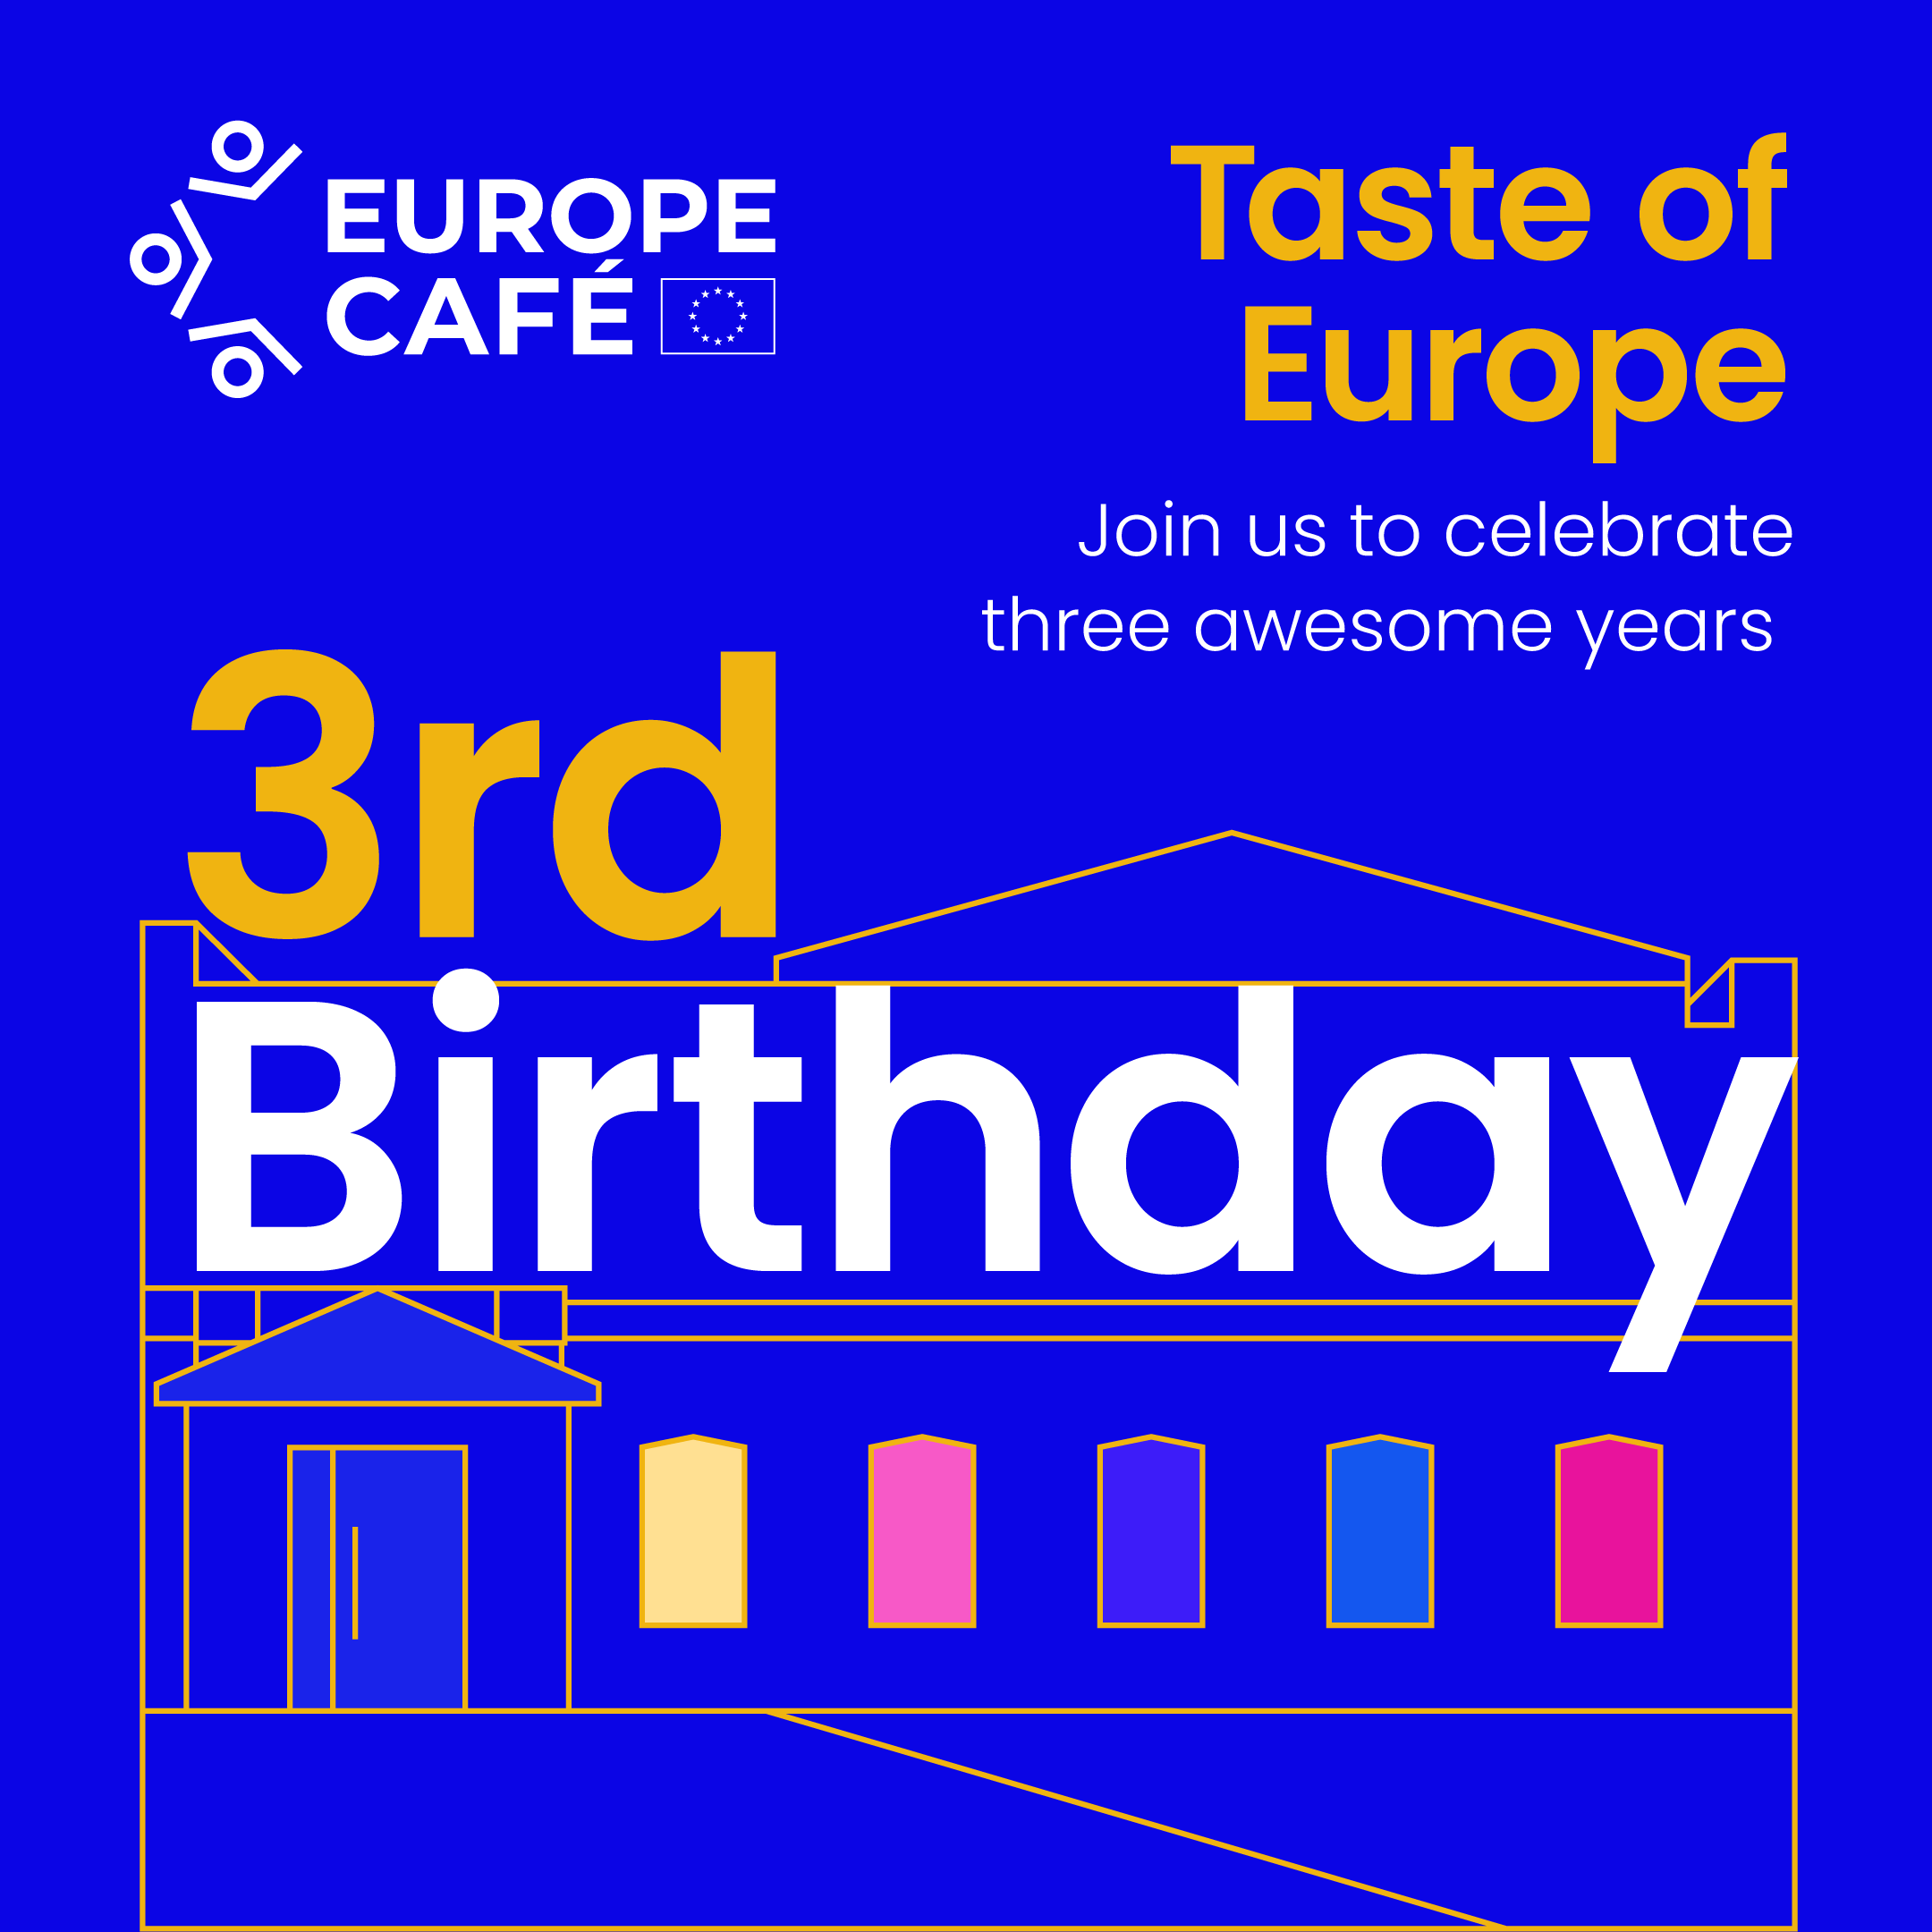 Let’s celebrate three years of Europe Café together